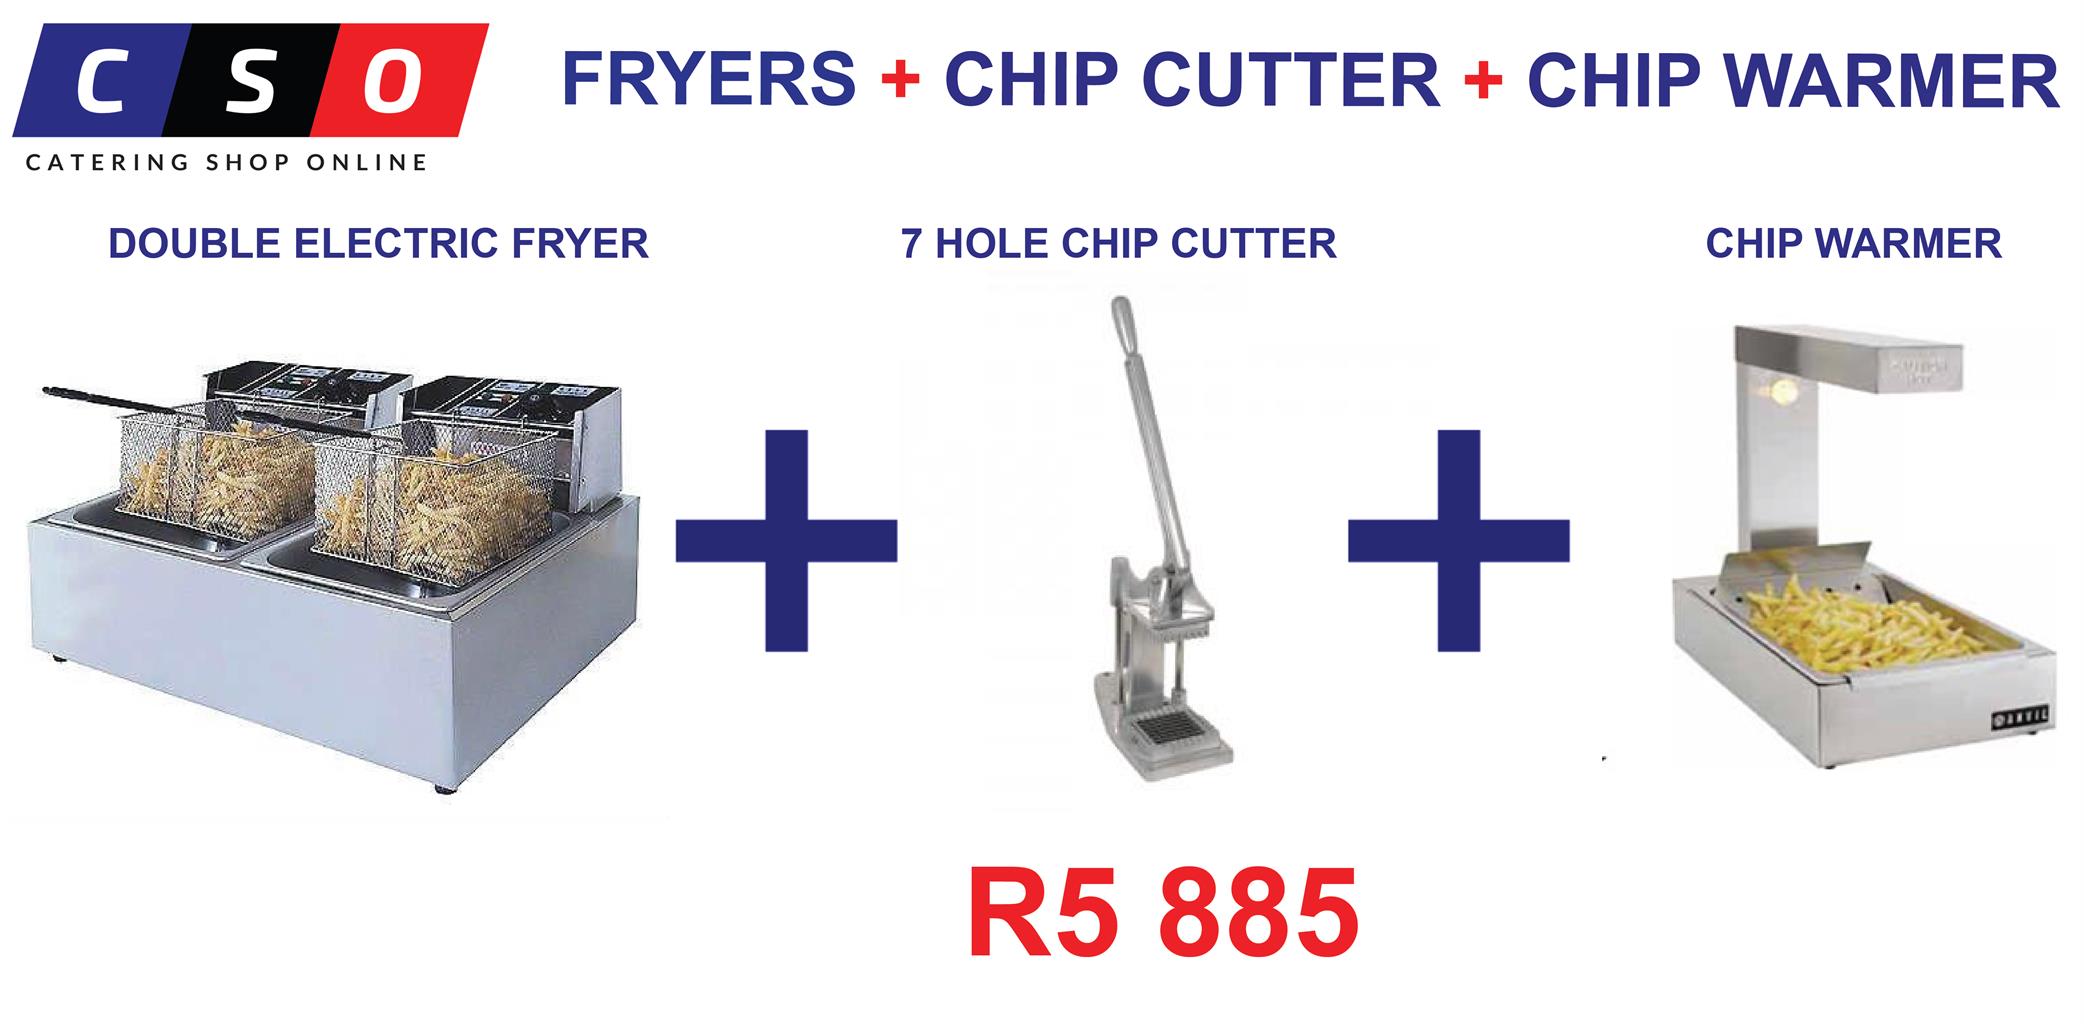 DOUBLE FRYER CHIP CUTTER CHIP WARMER COMBO SPECIAL